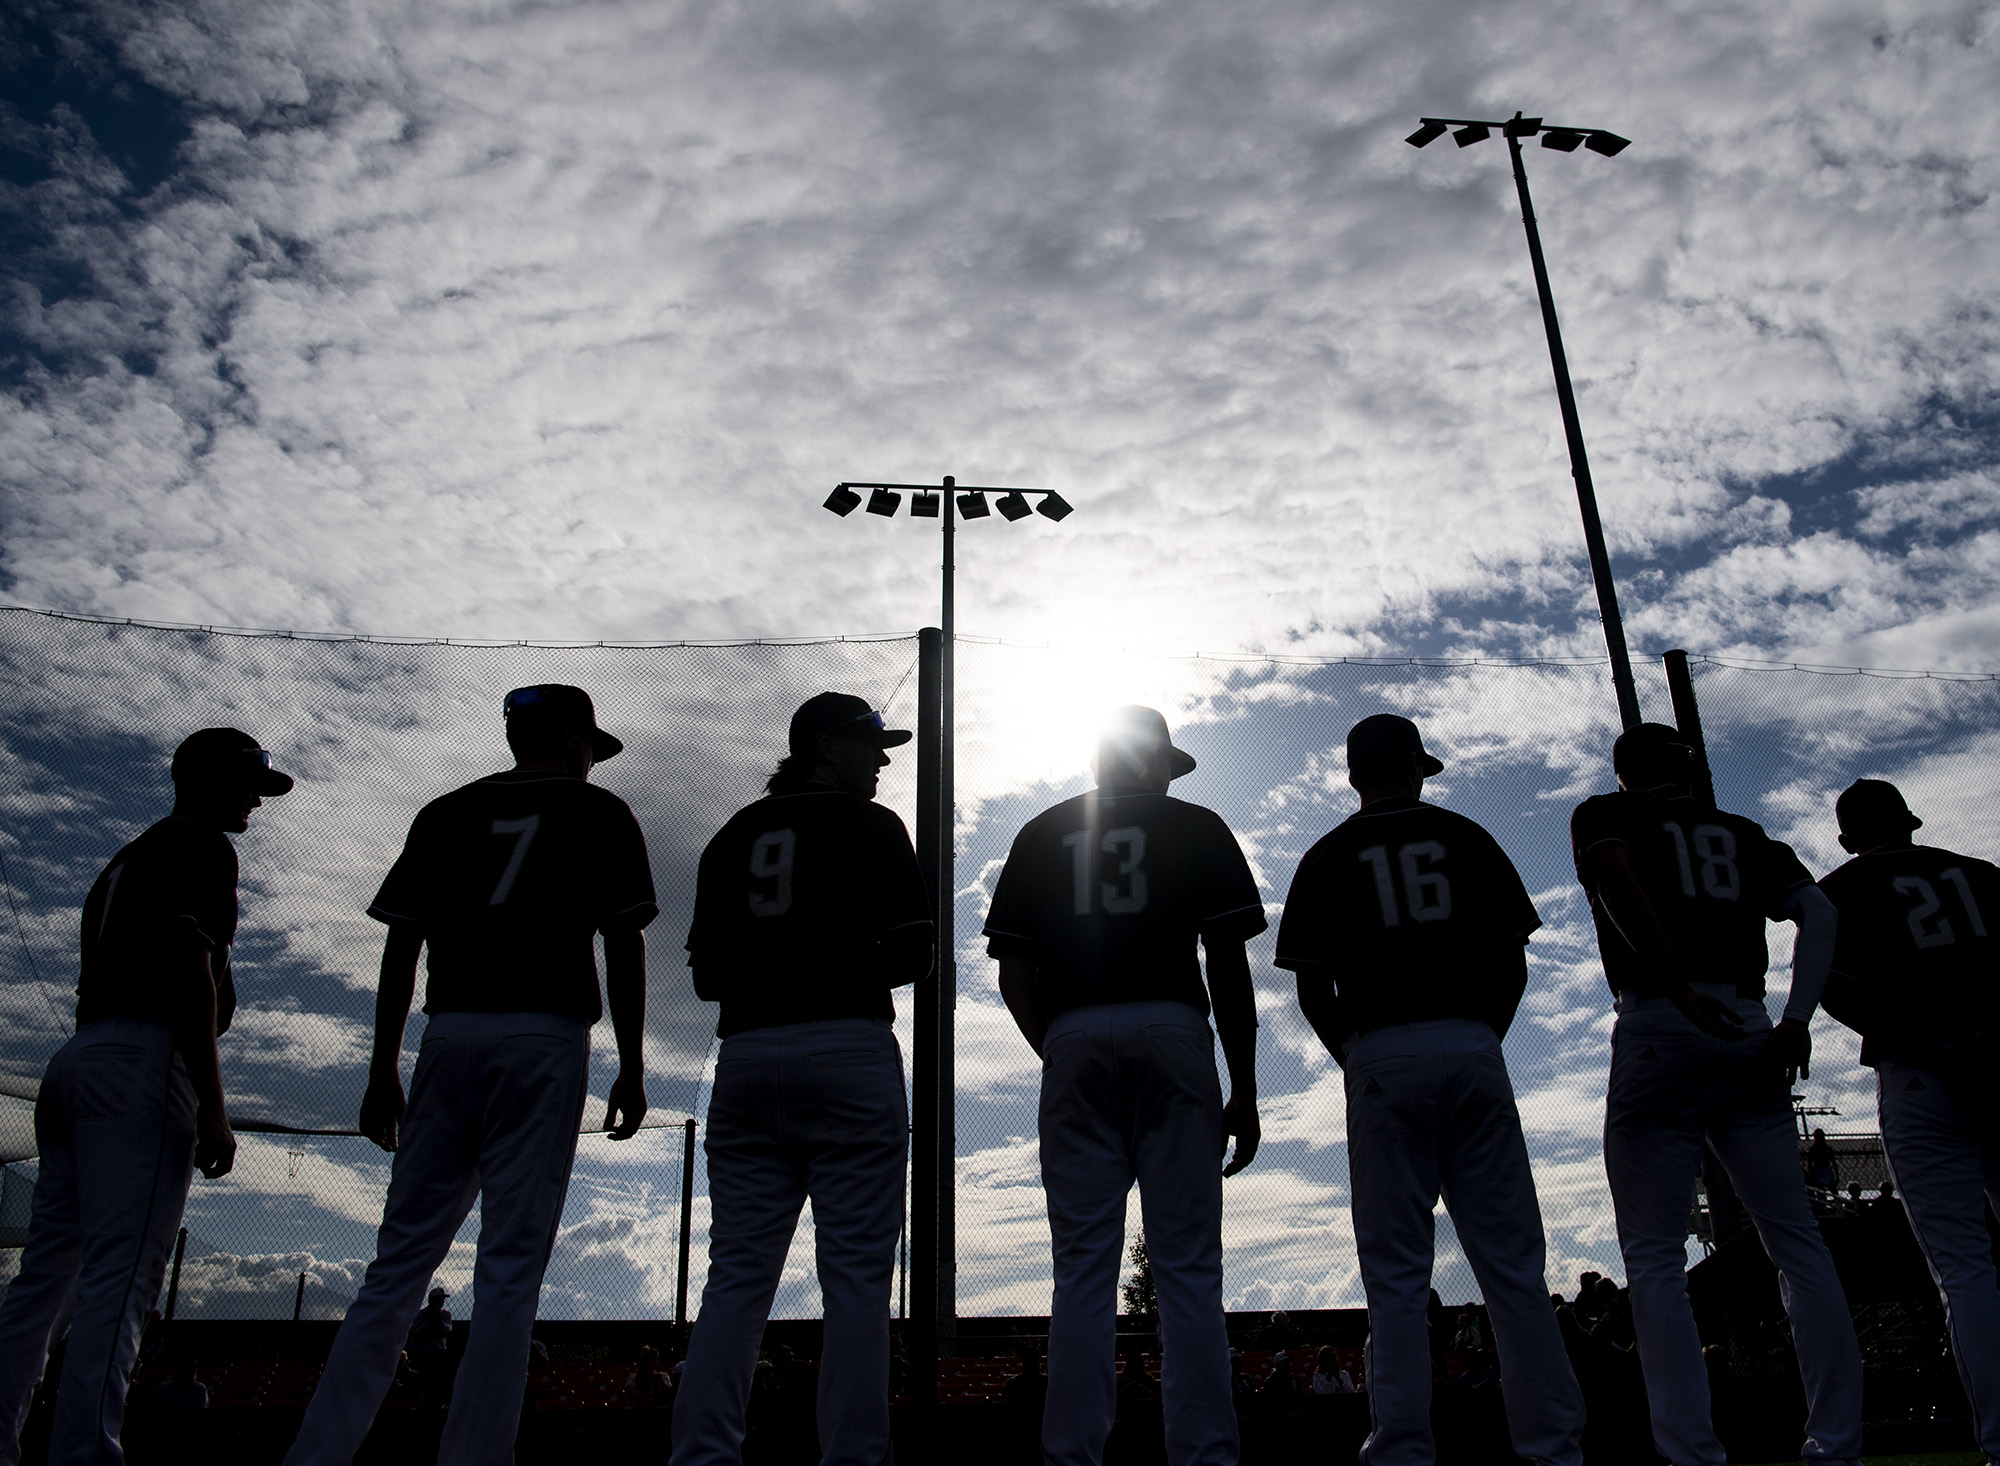 Partly cloudy skies hang above Ridgefield Raptors players Wednesday, June 1, 2022, during introductions before an exhibition game between the Ridgefield Raptors and the Cowlitz Black Bears at the Ridgefield Outdoor Recreation Complex.